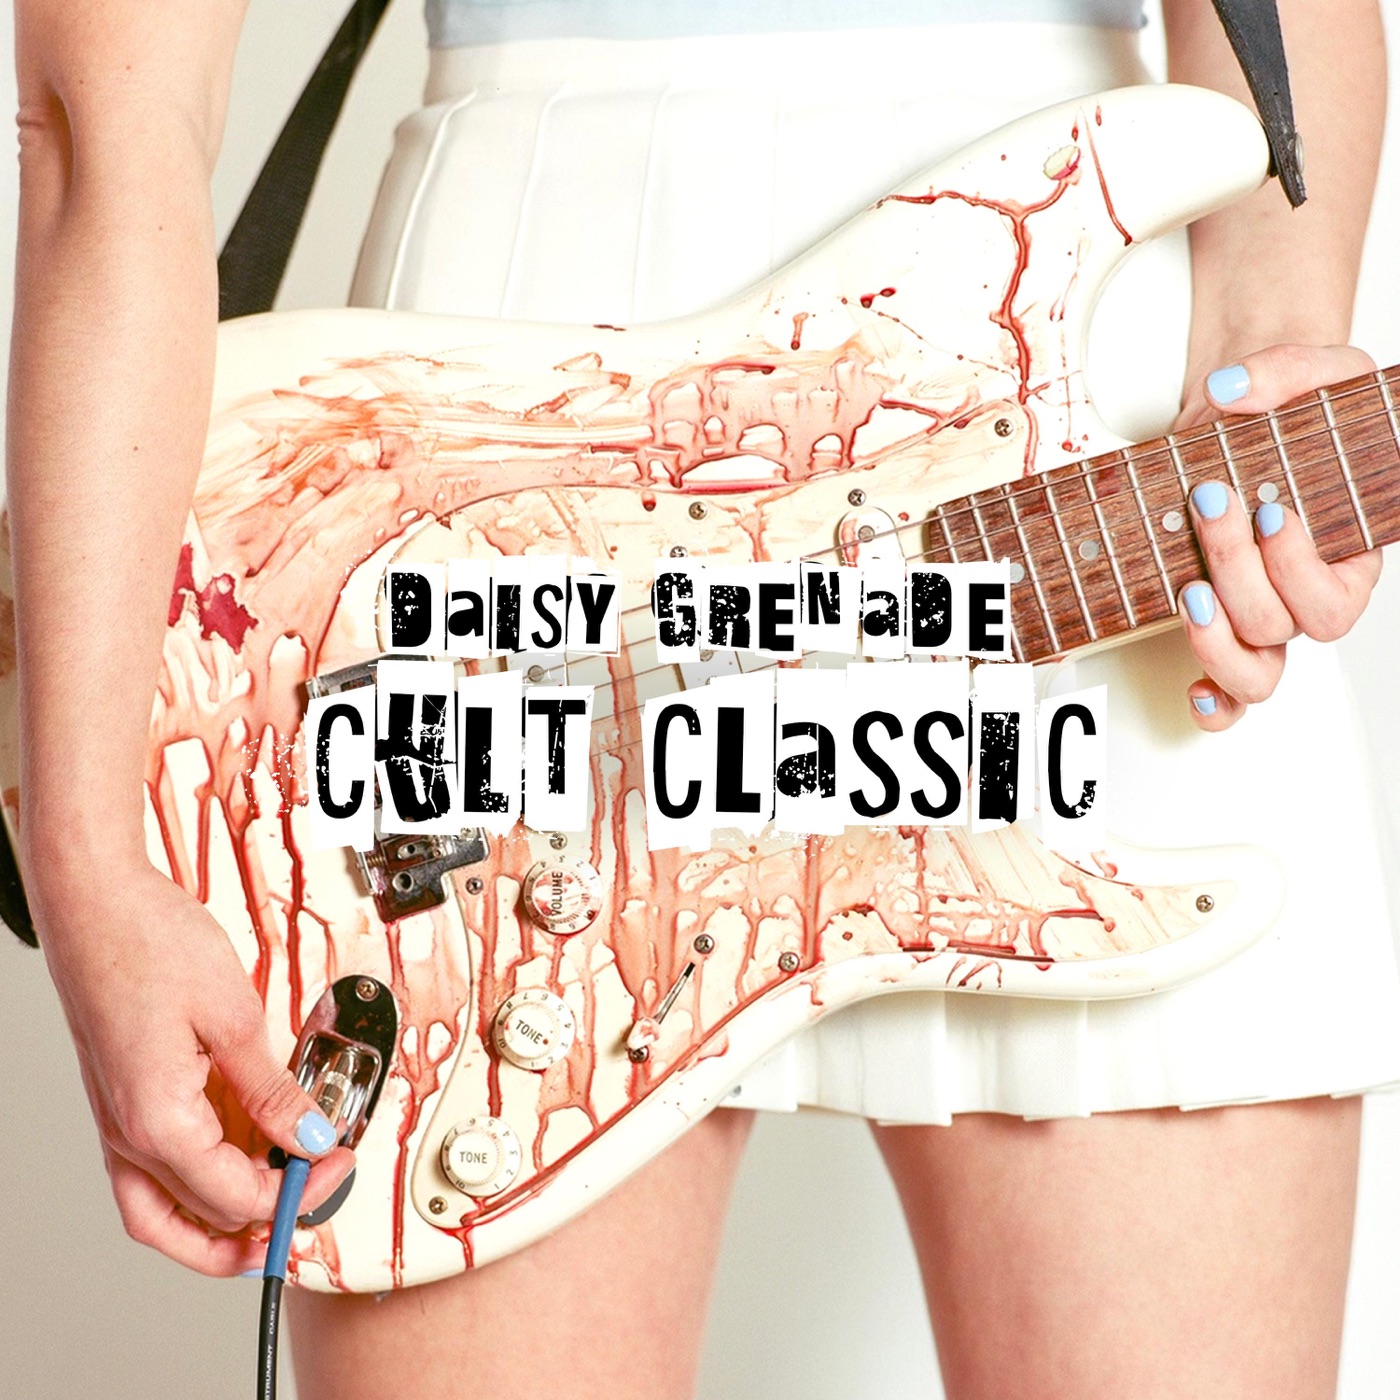 Cult Classic by Daisy Grenade